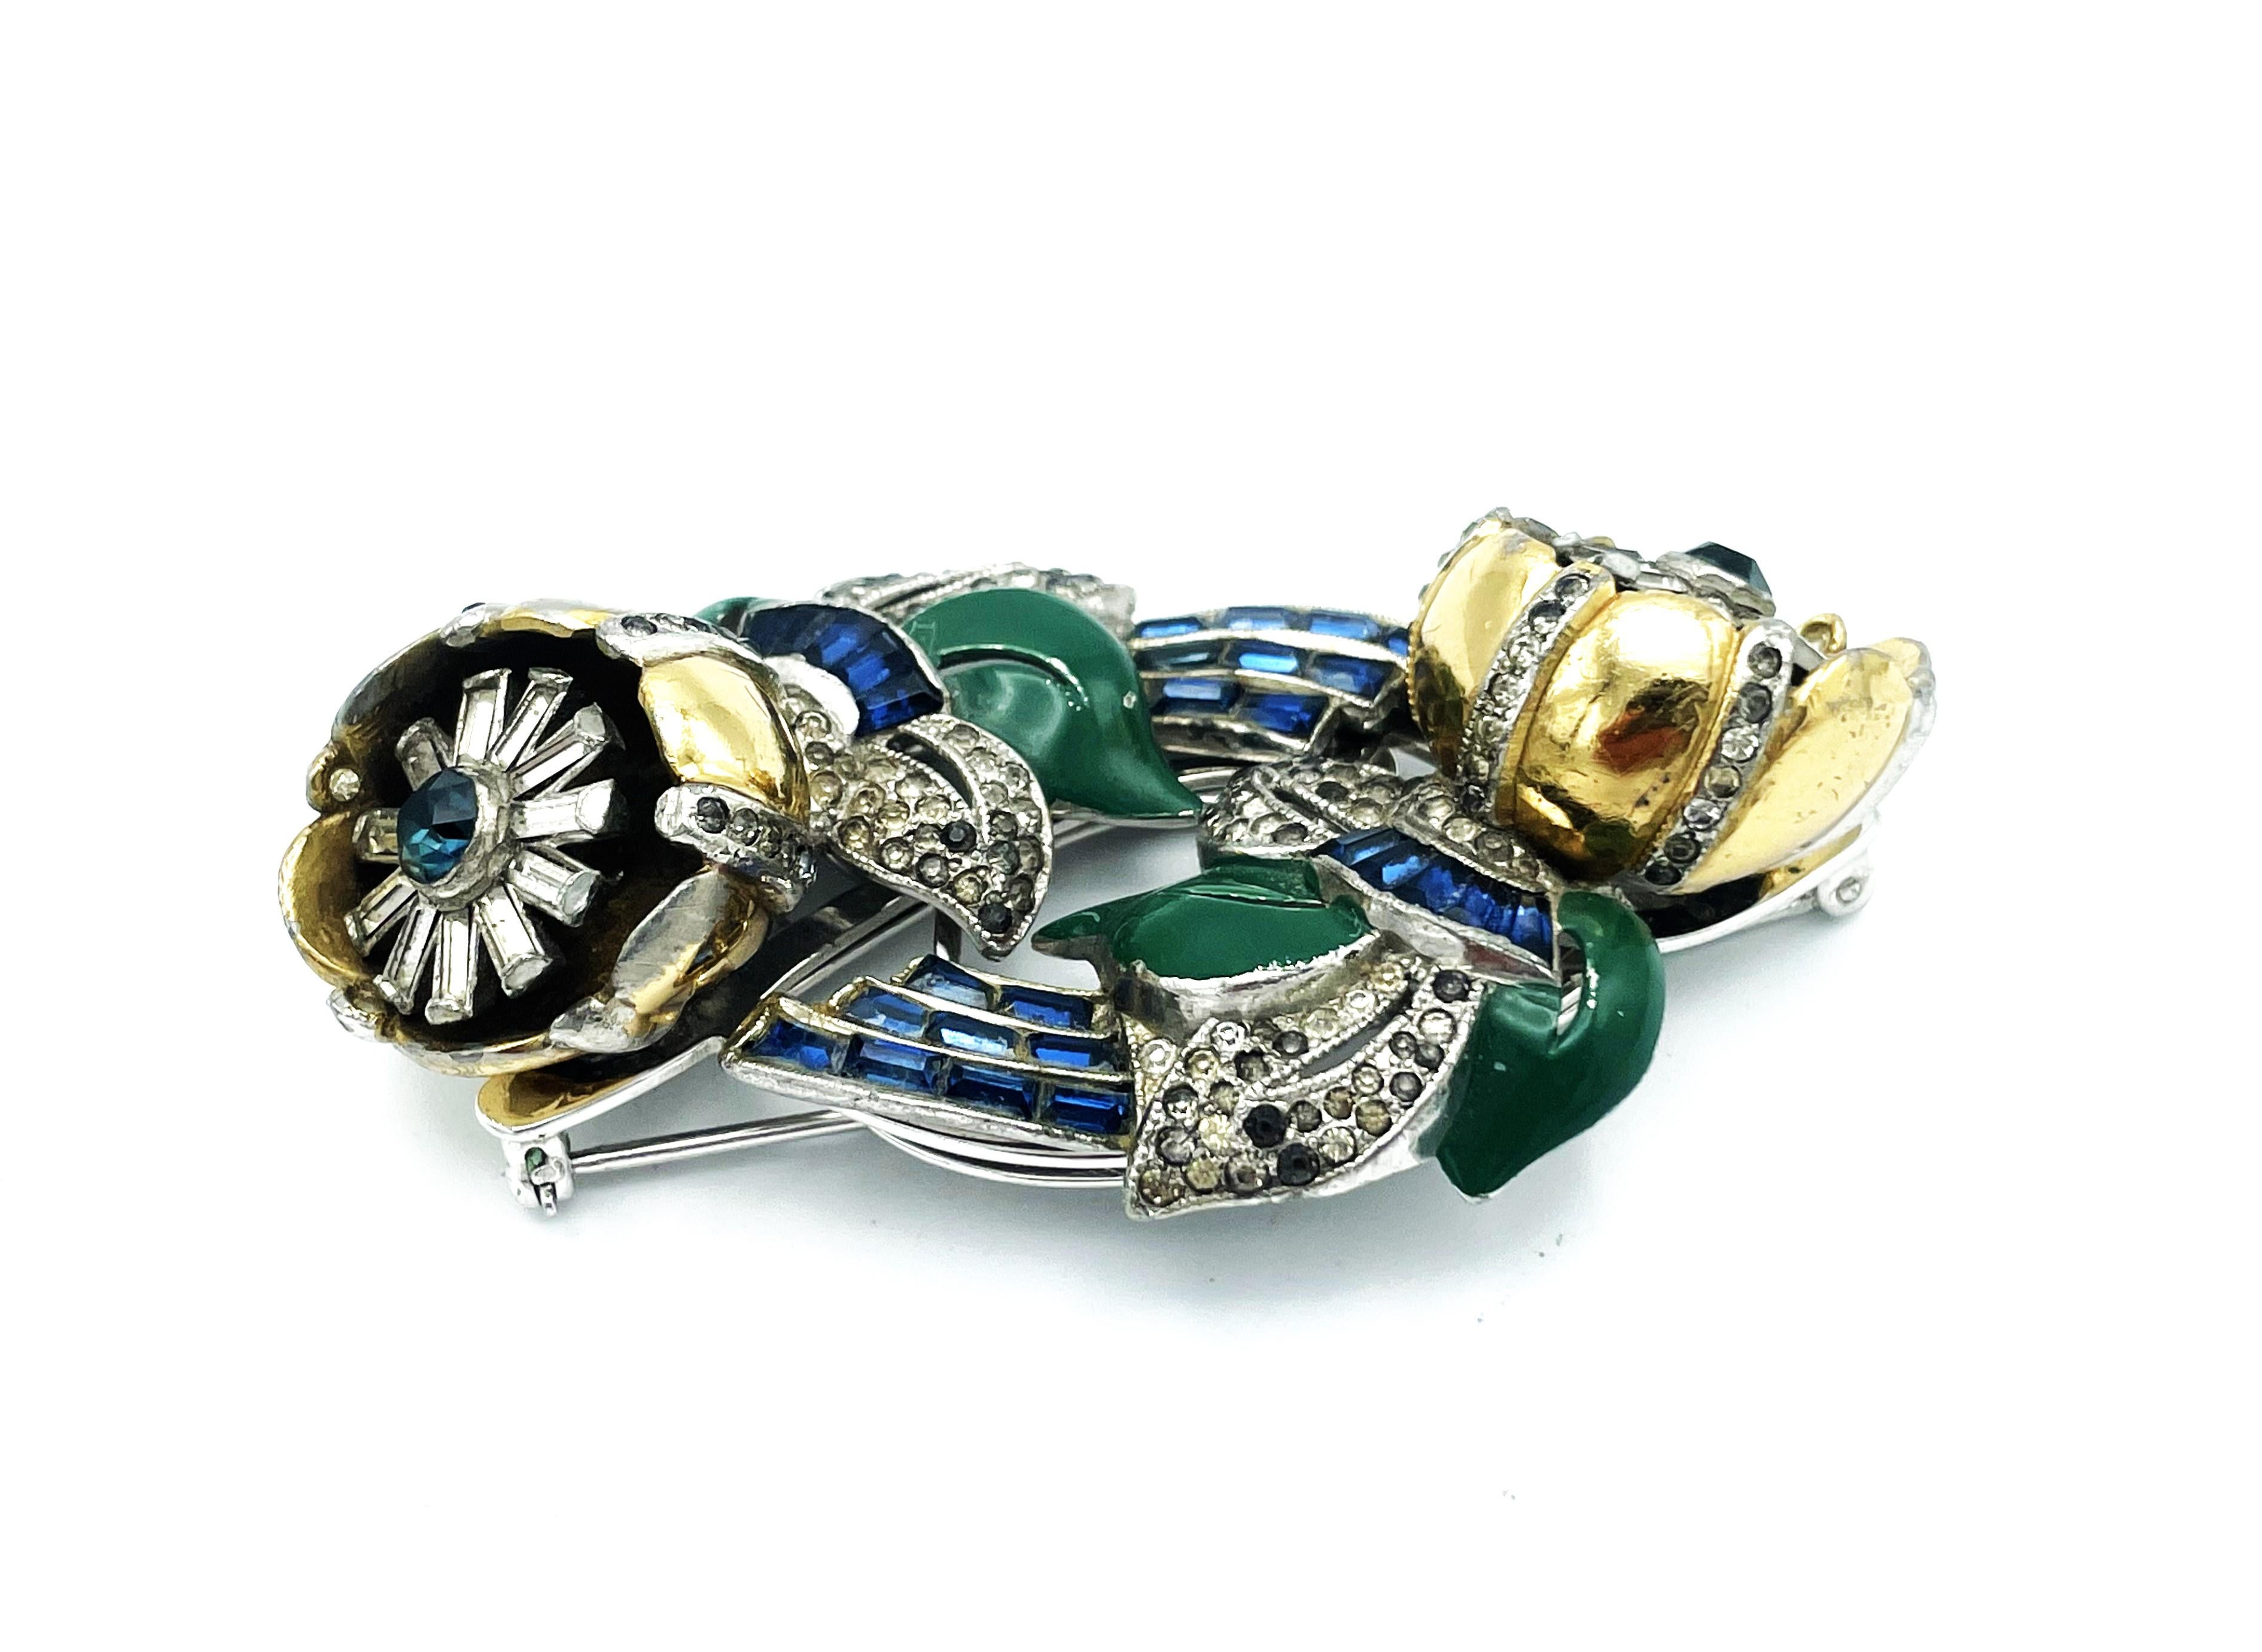 Coro classic flower twist Duett brooch of gilt metal, green emamal leafs, blue crystal baguette crystal stones and many small crystal pastes. Both flower clips separate off base to be worn separately.  Designed in USA in the 1940s, good Condition -